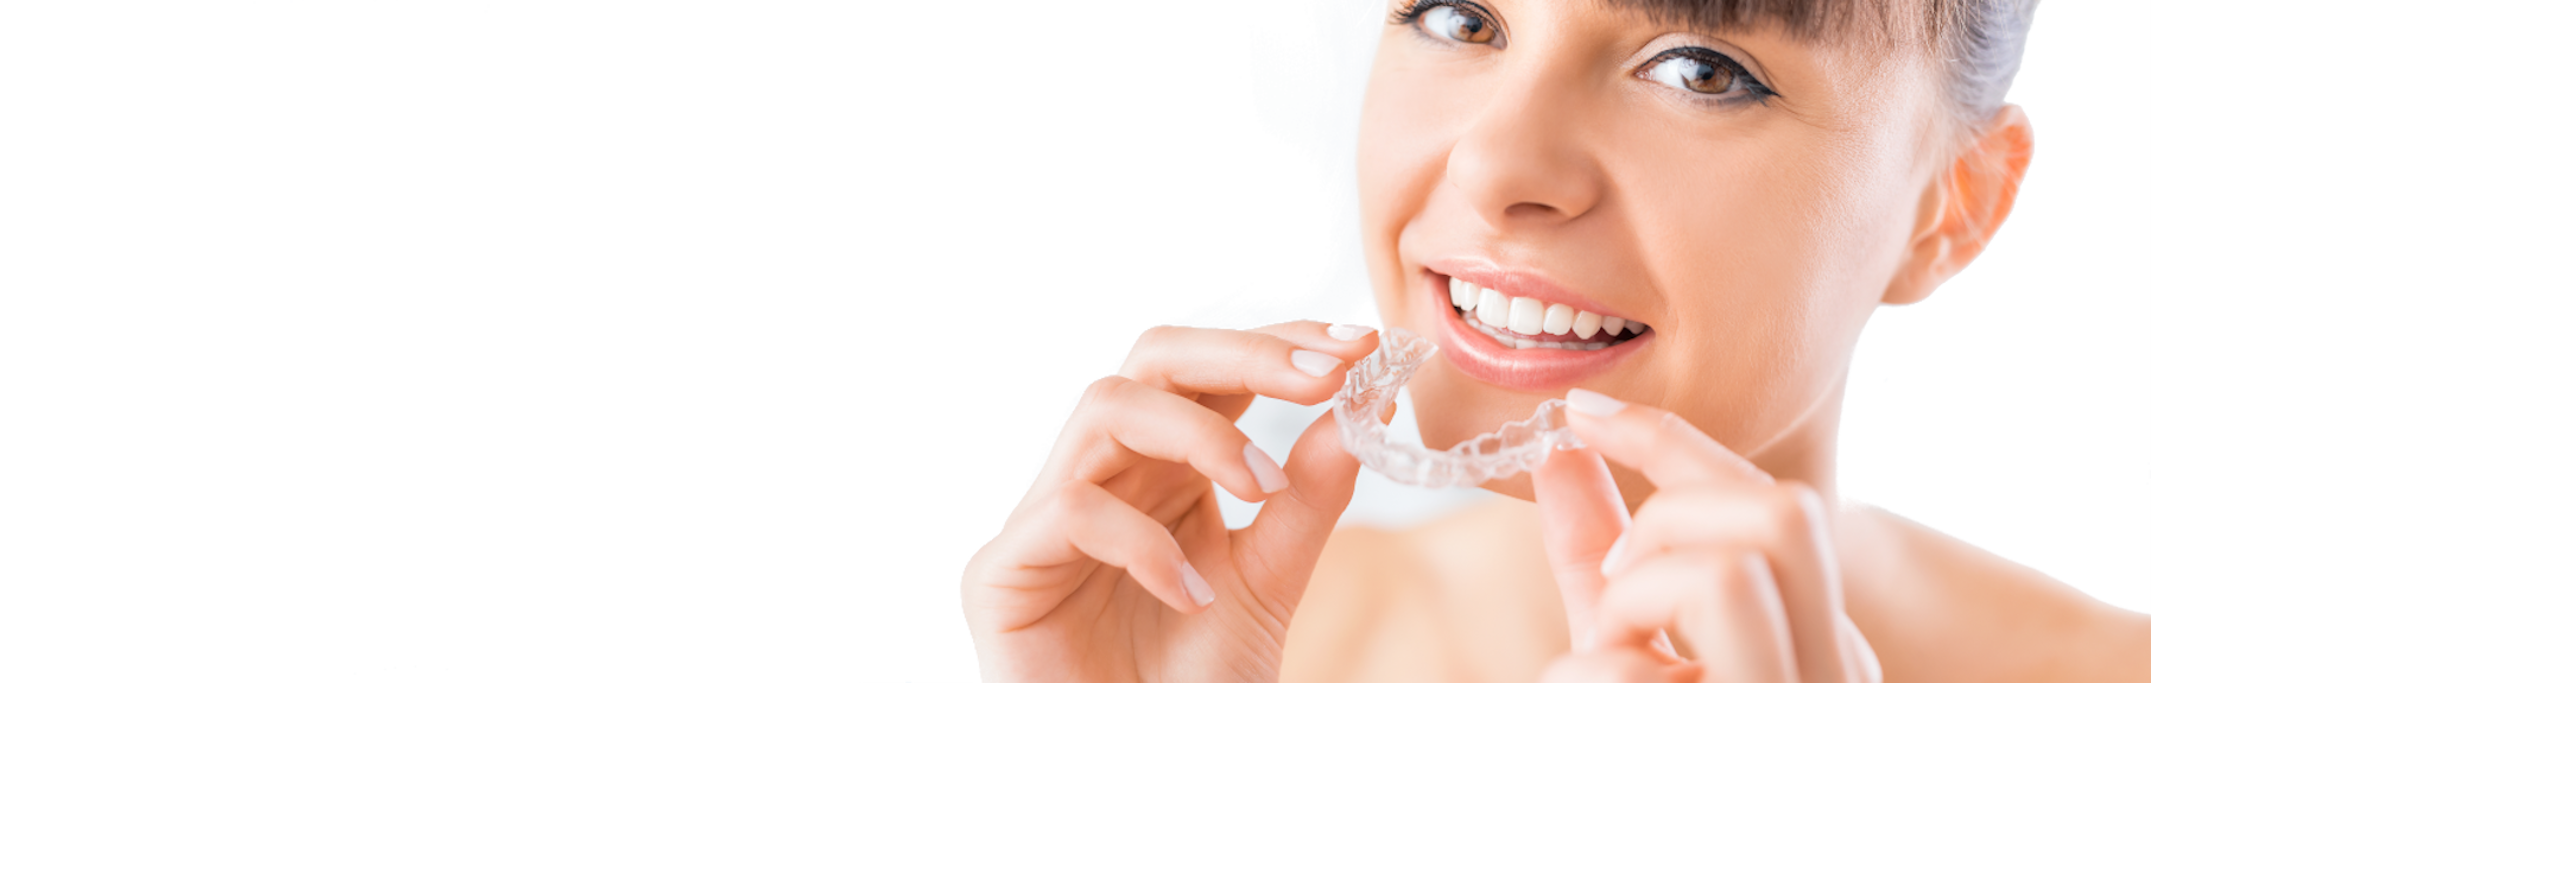 Woman putting on Invisalign clear braces